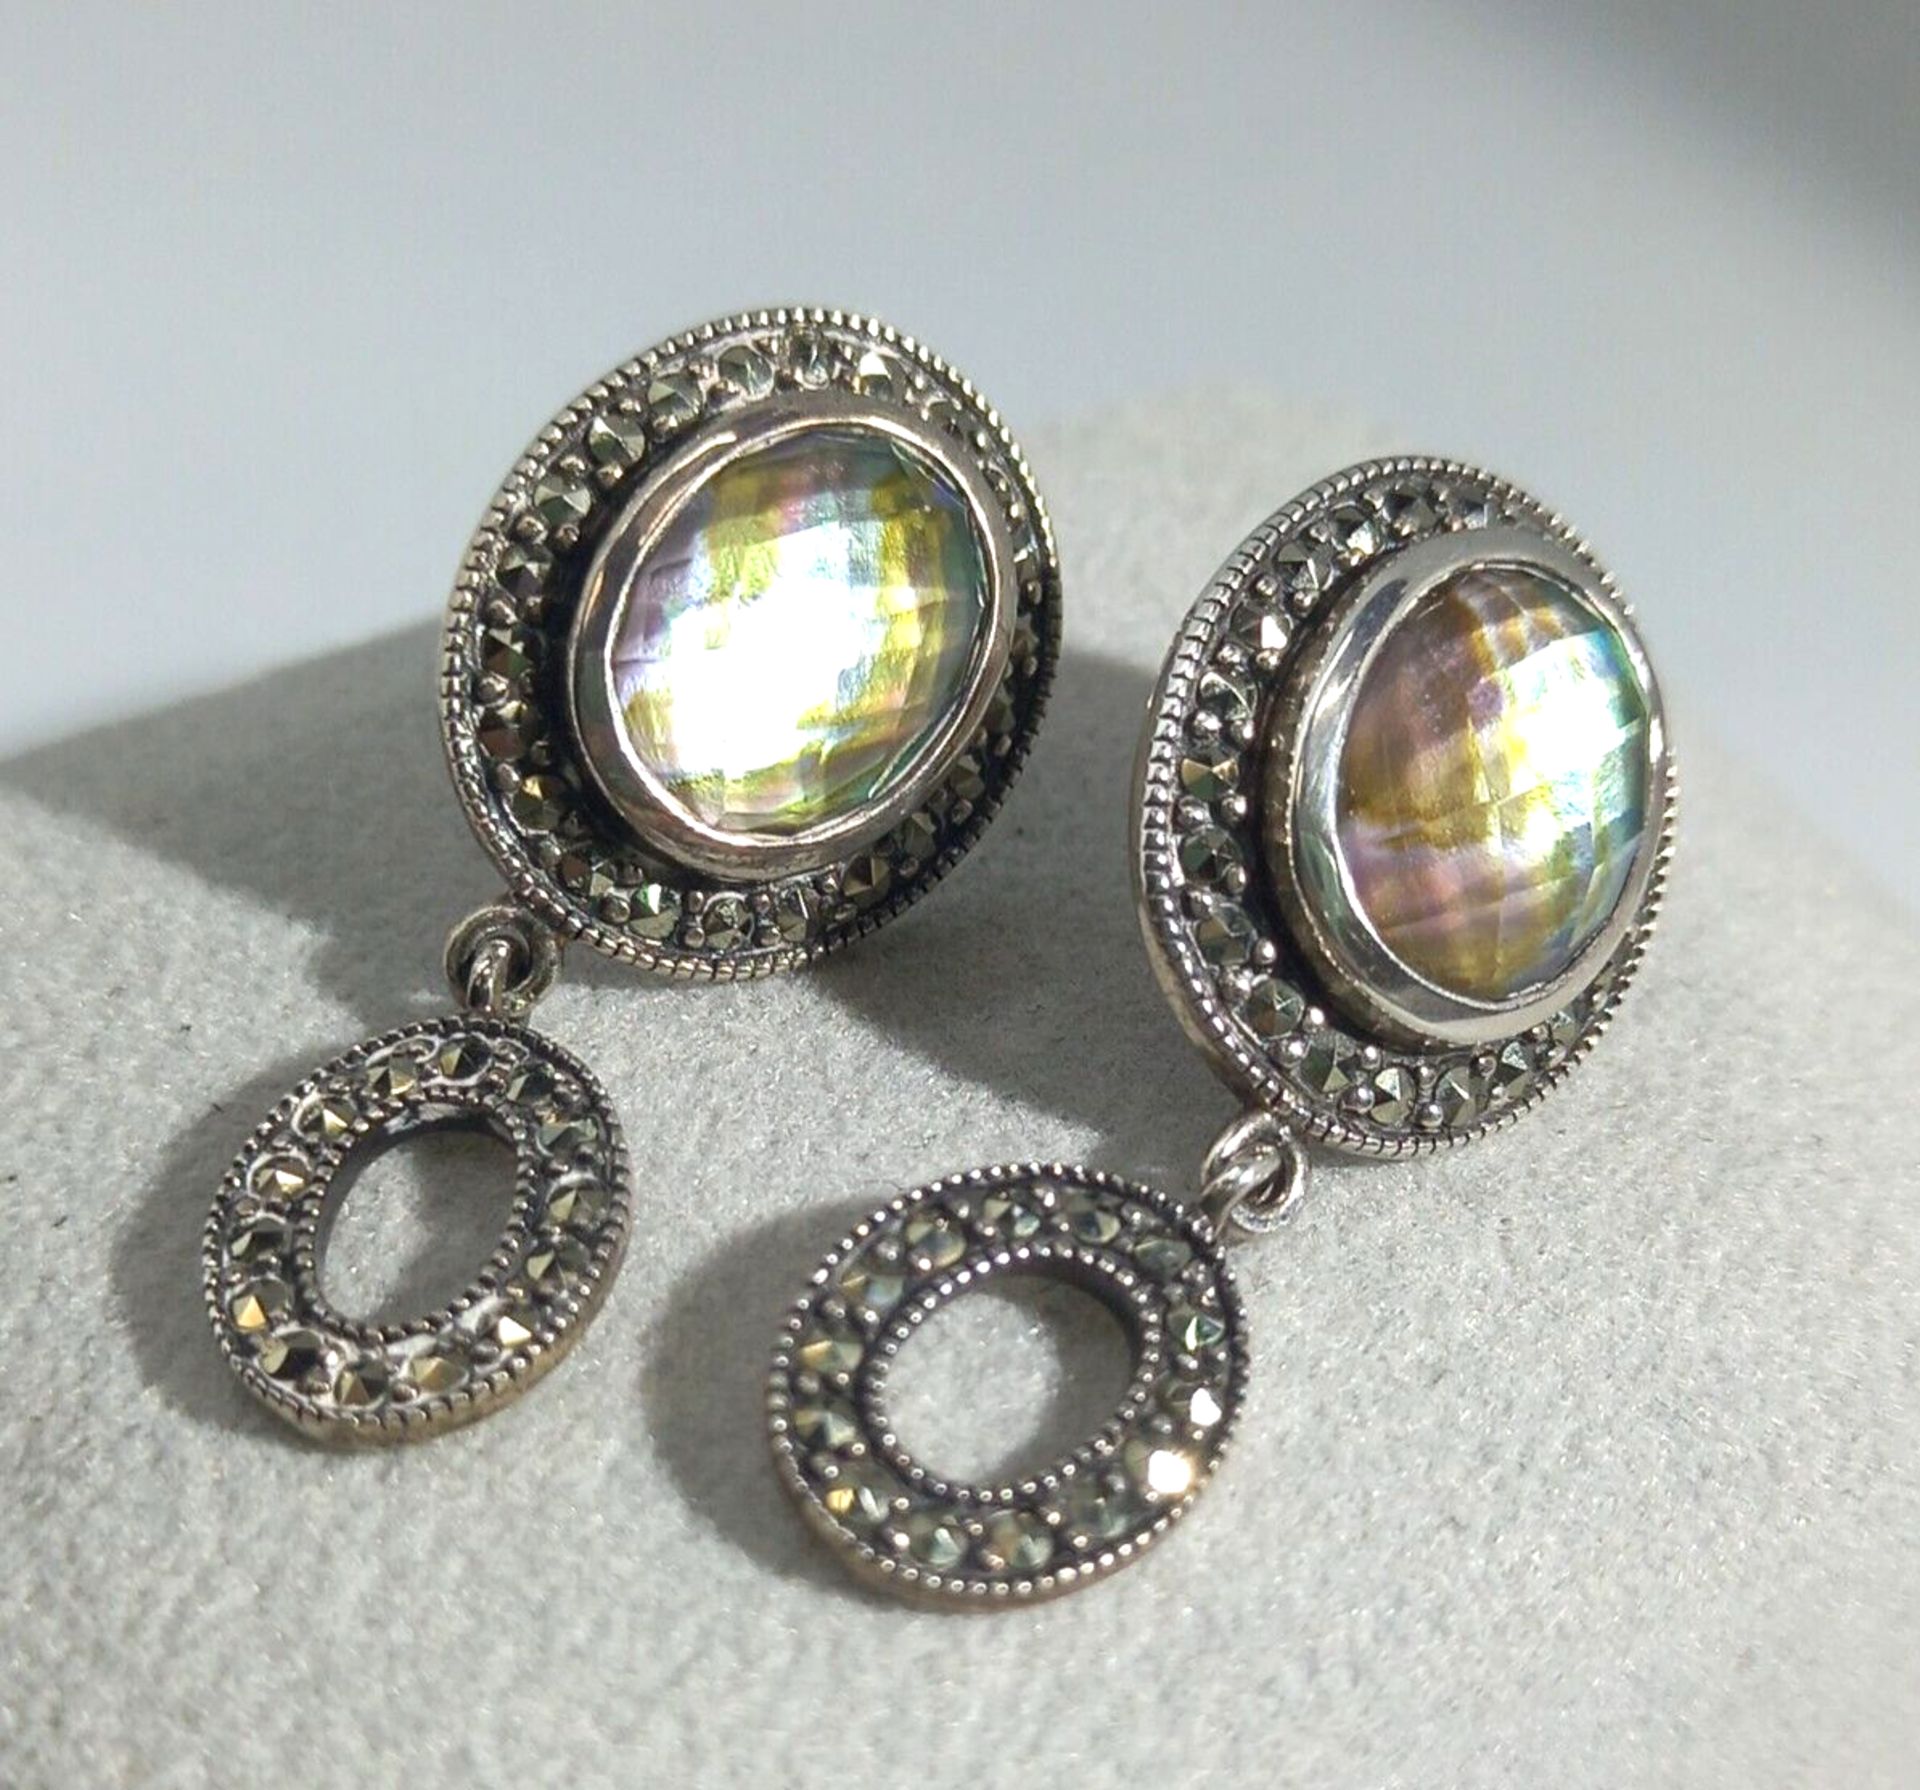 STUNNING MARQUISETTE & MOTHER OF PEARL EARRINGS/SILVER IN GIFT BOX - Image 5 of 5